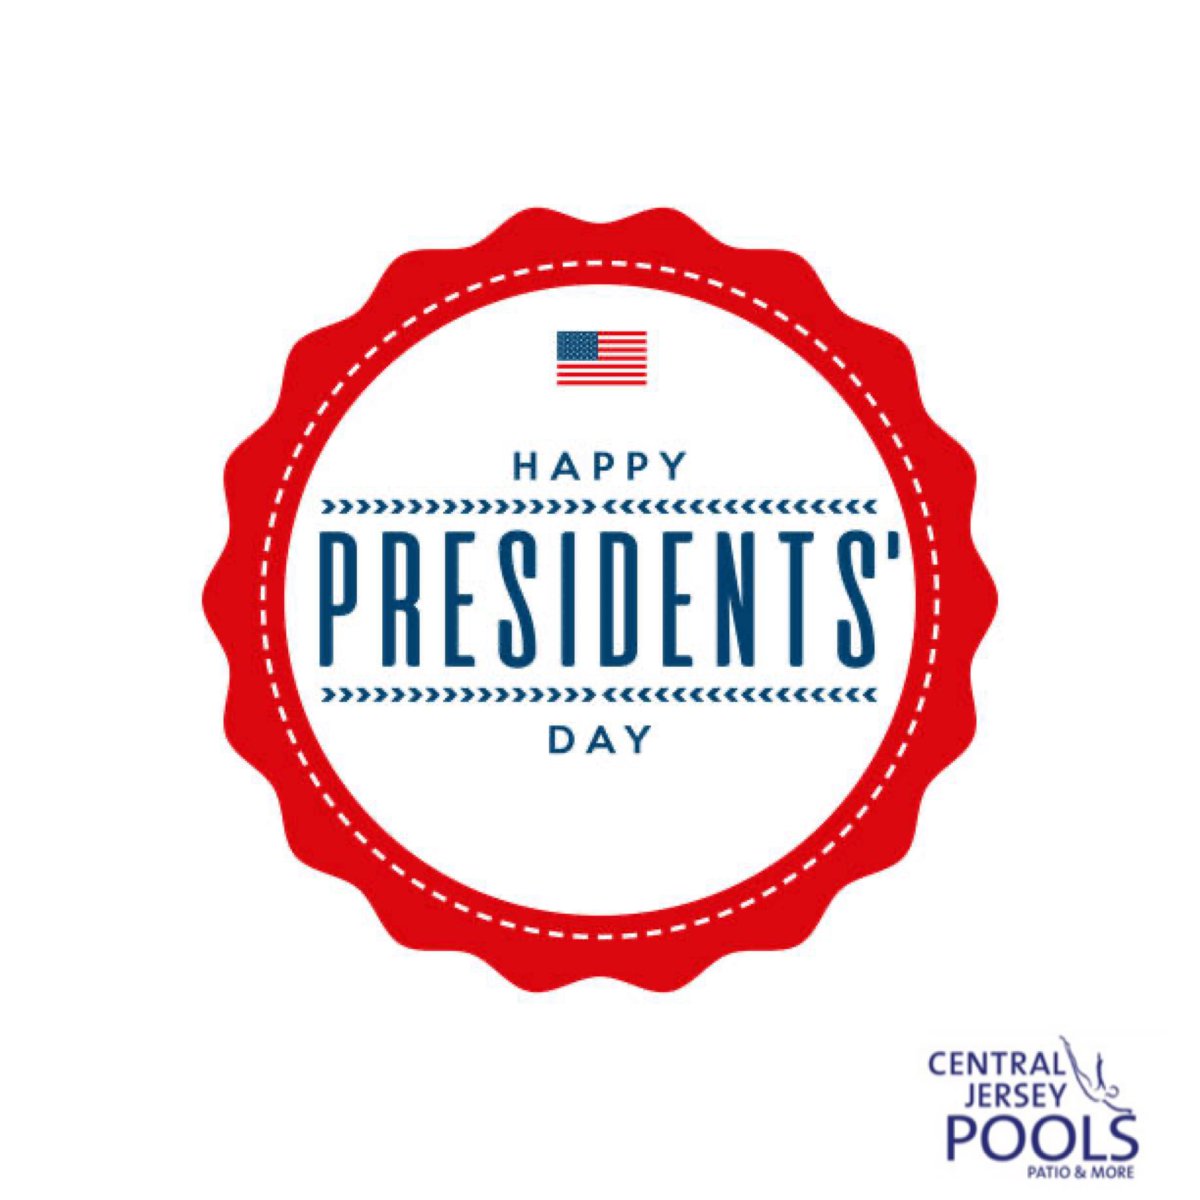 Happy Presidents’ Day! 🇺🇸 Make sure you stop on by the store to check out our pools and have us install one just in time for the summer! #cjpools #centraljerseypools #pools #poolcompany #holidays #presidentsday #americanflag